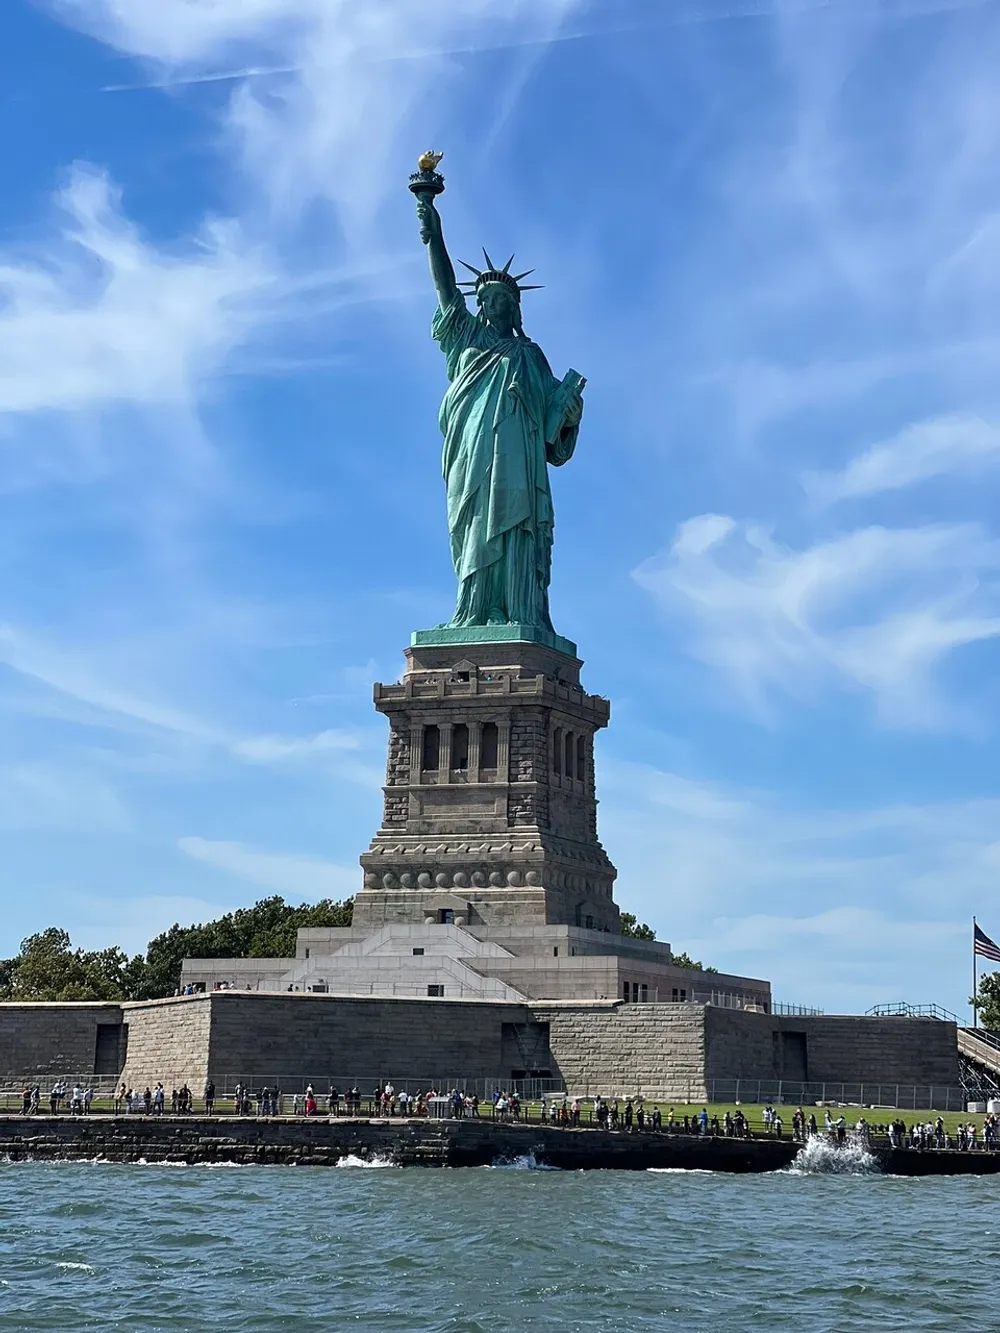 The image captures the Statue of Liberty standing tall against a blue sky with numerous visitors visible at its base